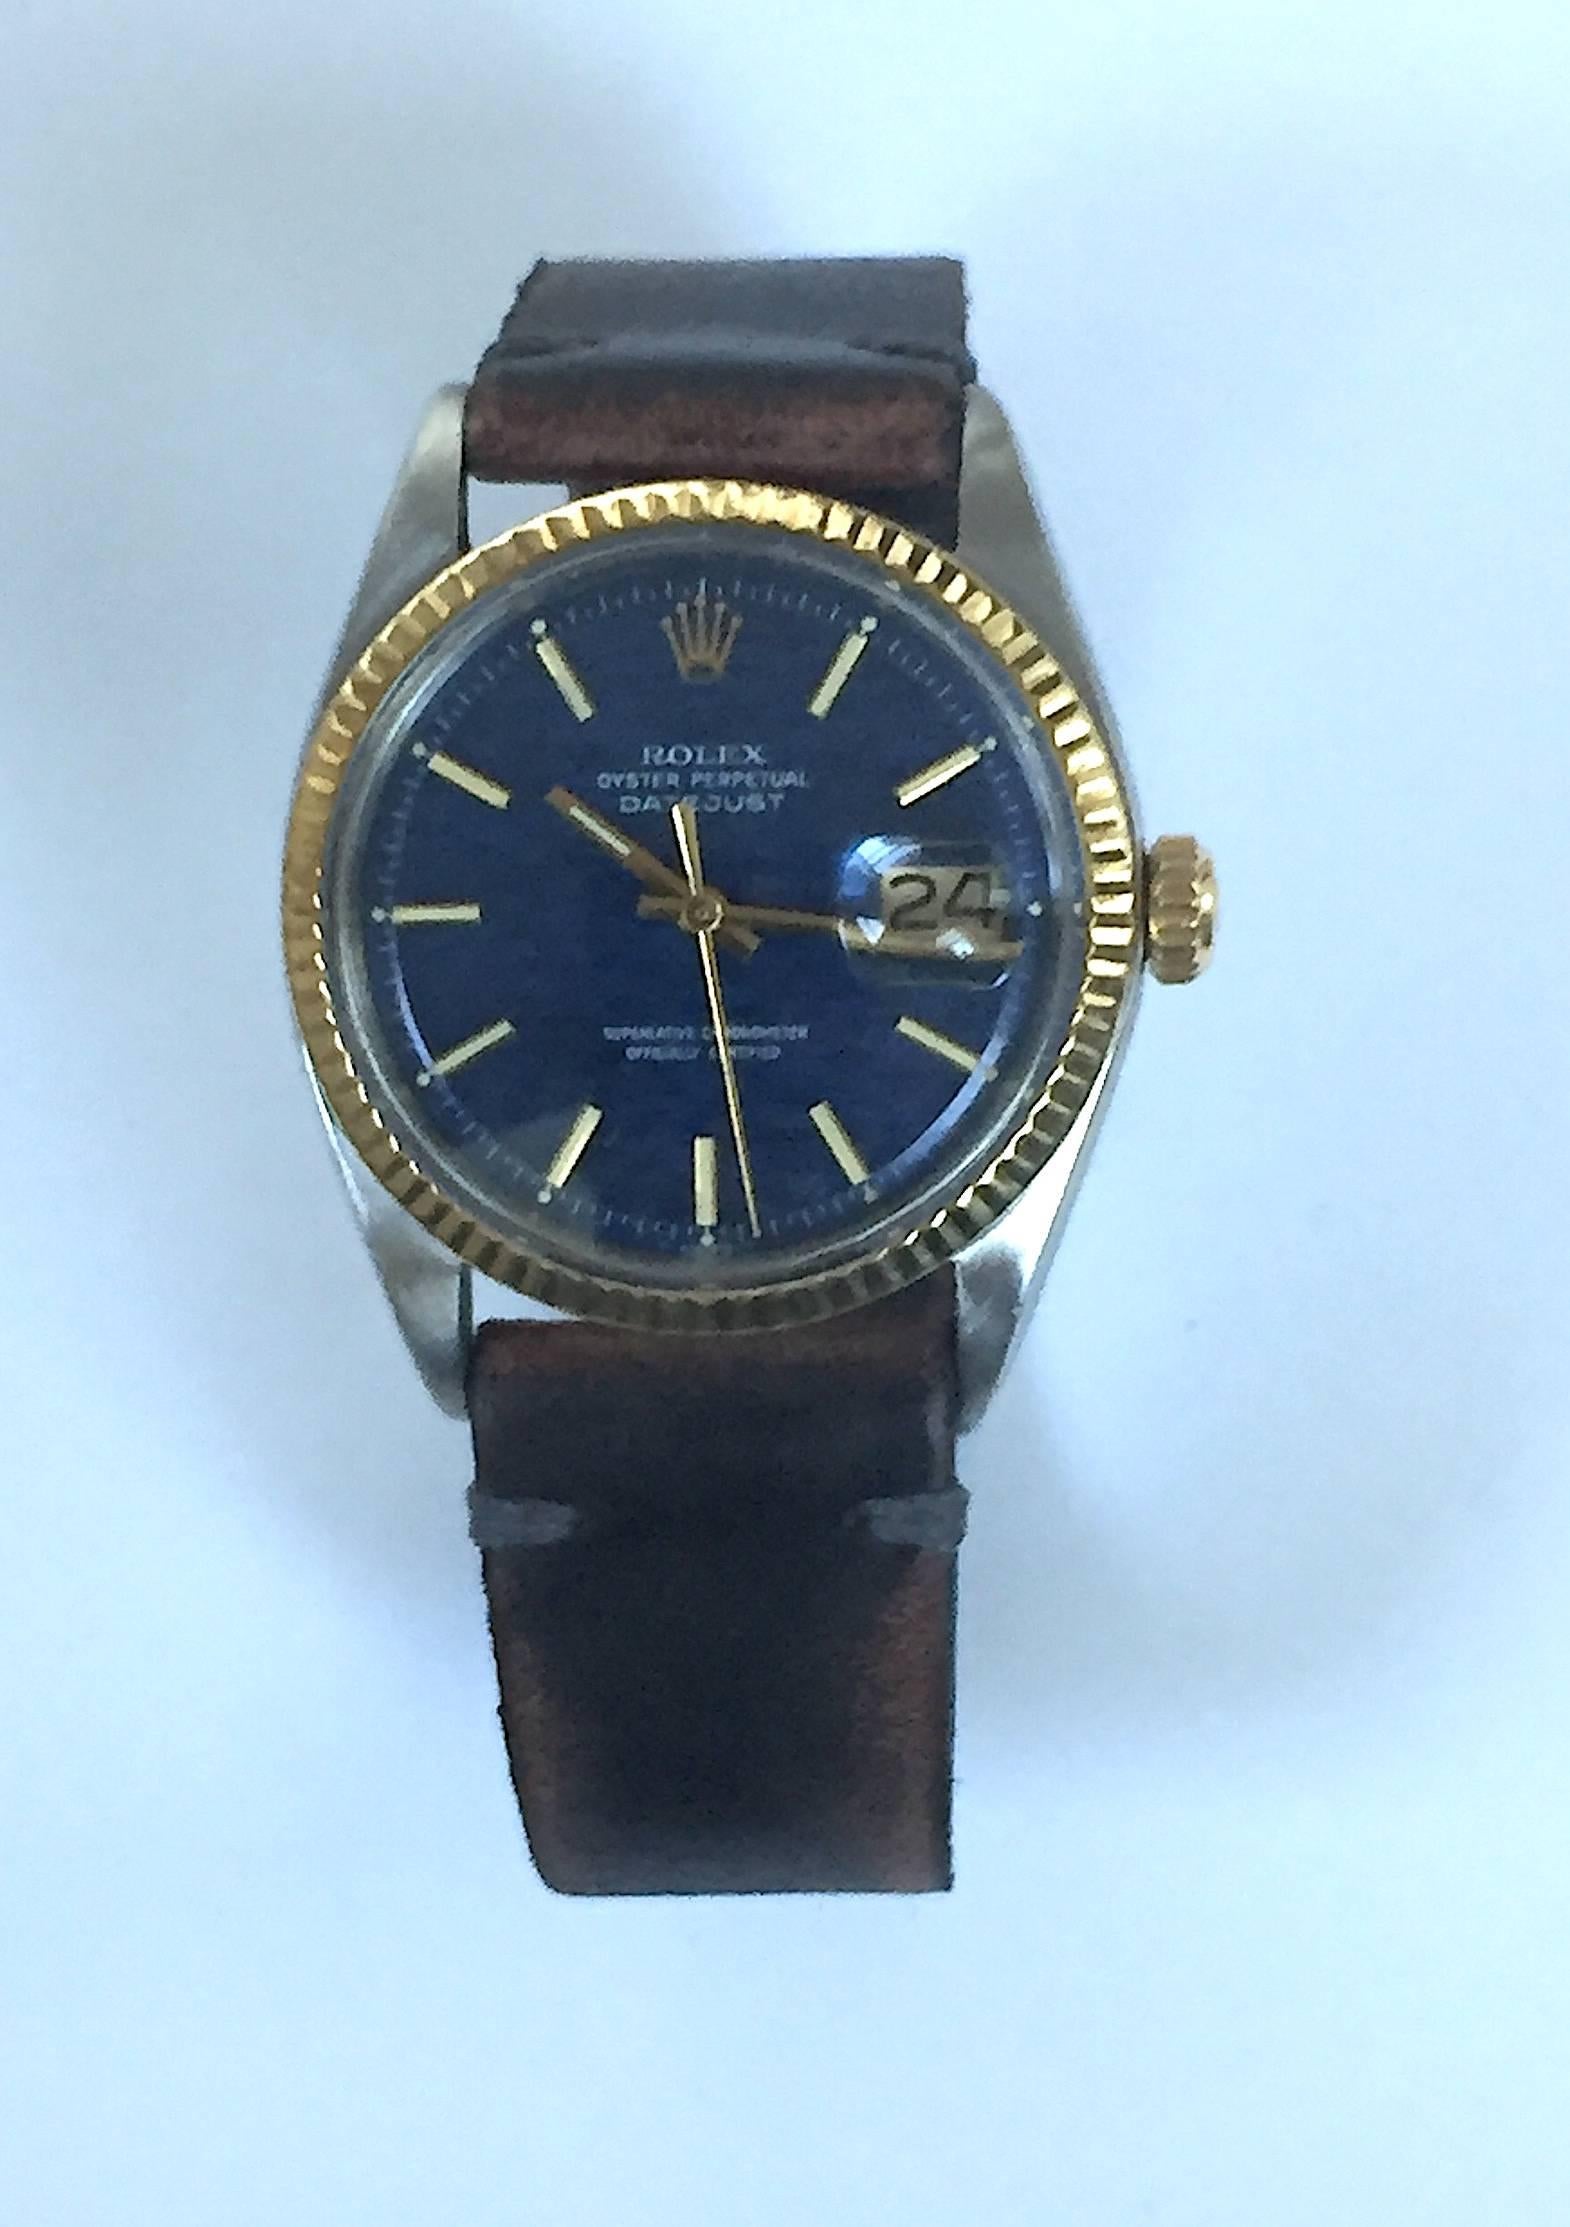 Rolex Stainless Steel and Yellow Gold Oyster Perpetual Datejust Watch
Rare Factory Blue Linen/Wave Dial with Applied Gold Hour Markers
Yellow Gold Fluted Bezel
Stainless Steel Case
36mm in size 
Features Rolex Automatic Movement with Calibre 1570